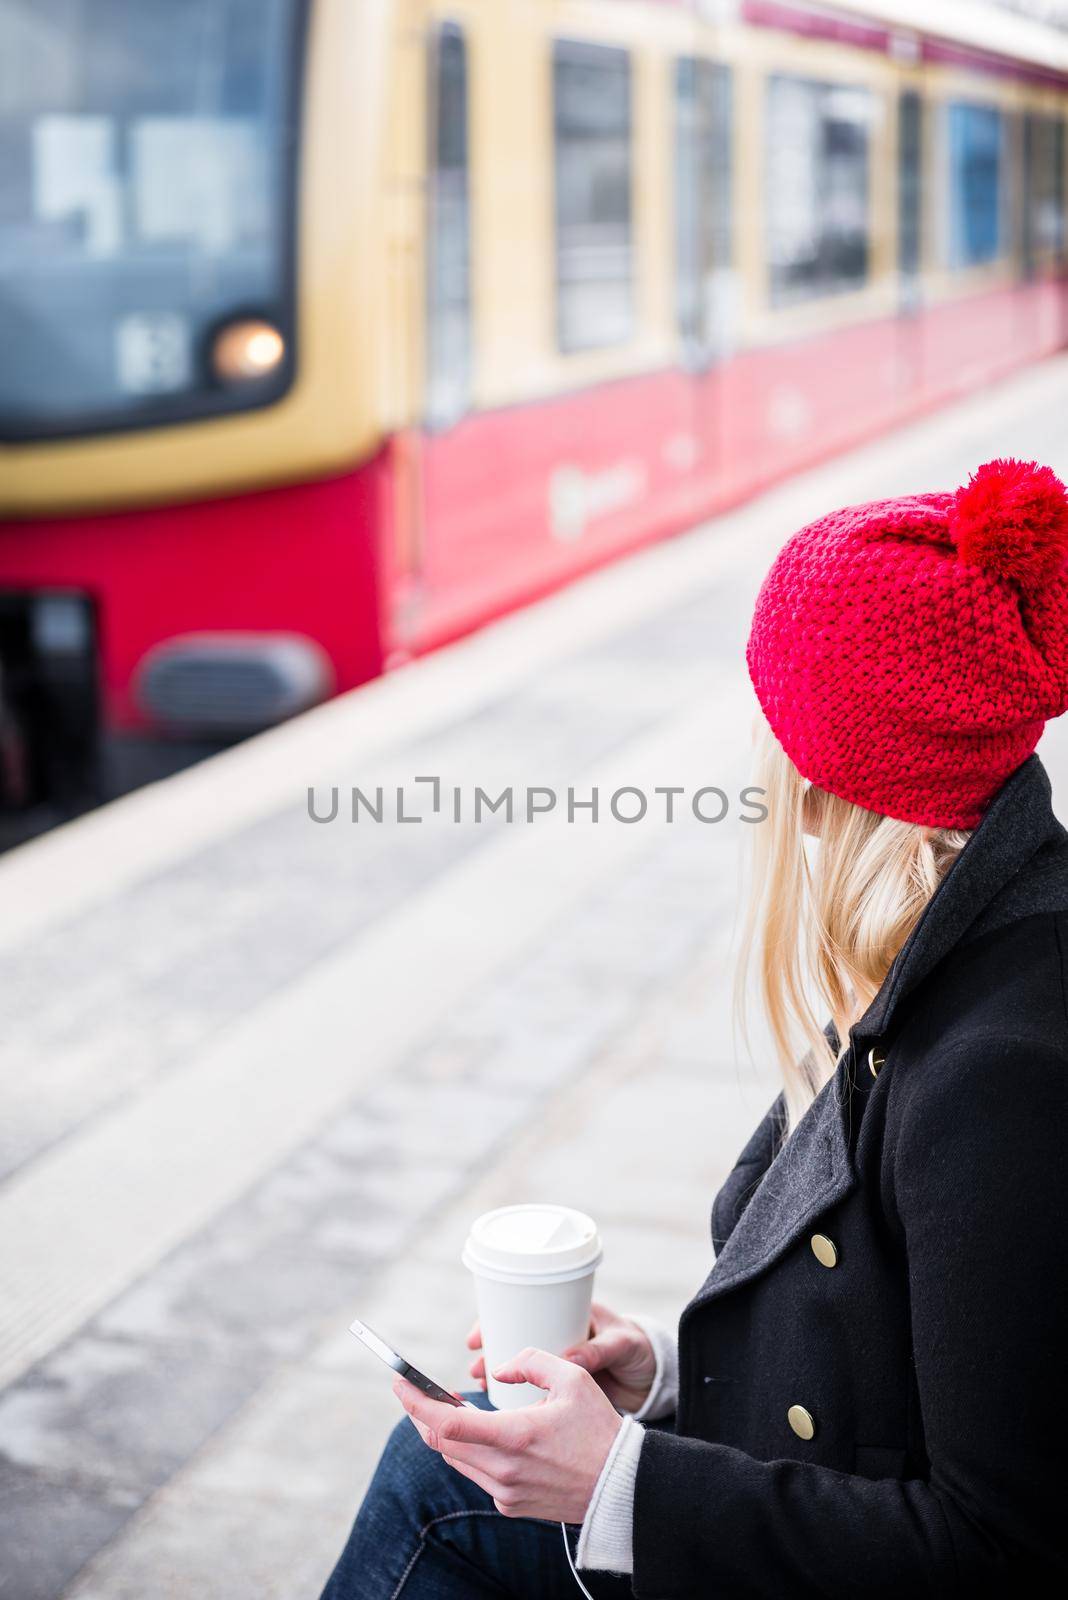 Woman waiting for suburban train in station drinking coffee holding a phone